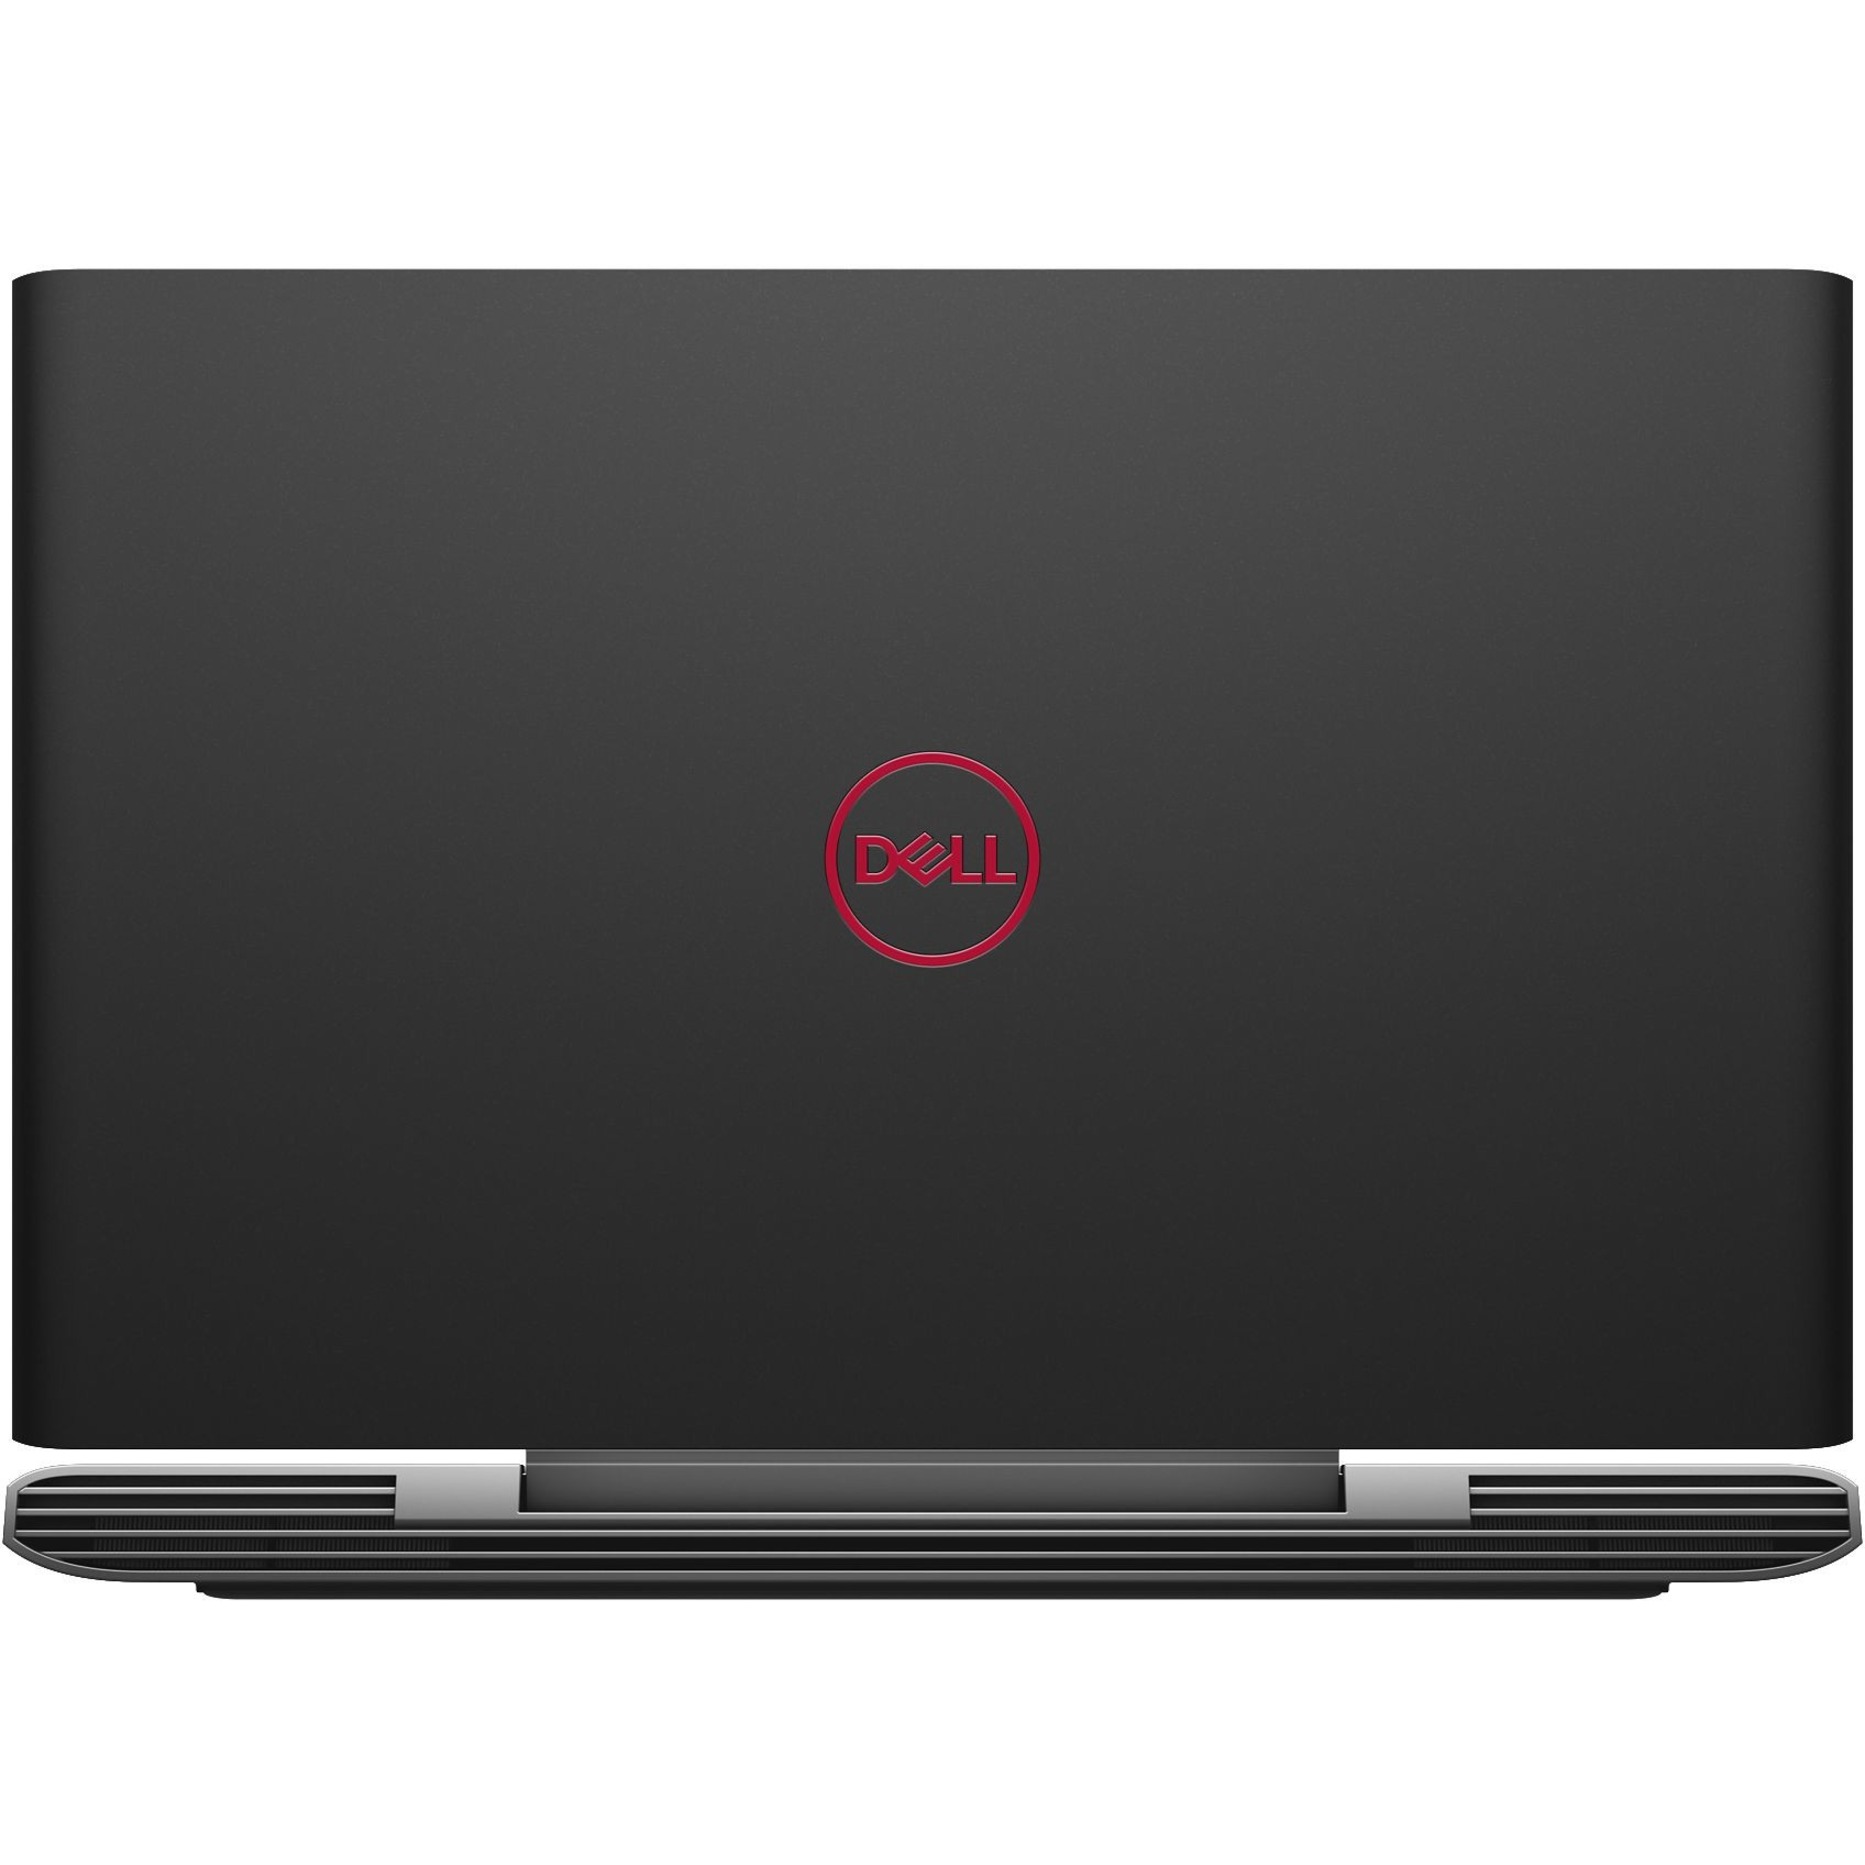 Dell Inspiron 15 7577 15.6 inch Gaming Laptop, Intel Core i5-7300HQ, 8GB Memory, 128GB Solid State Drive + 1TB HDD, NVIDIA® GeForce® GTX 1060 - image 15 of 23